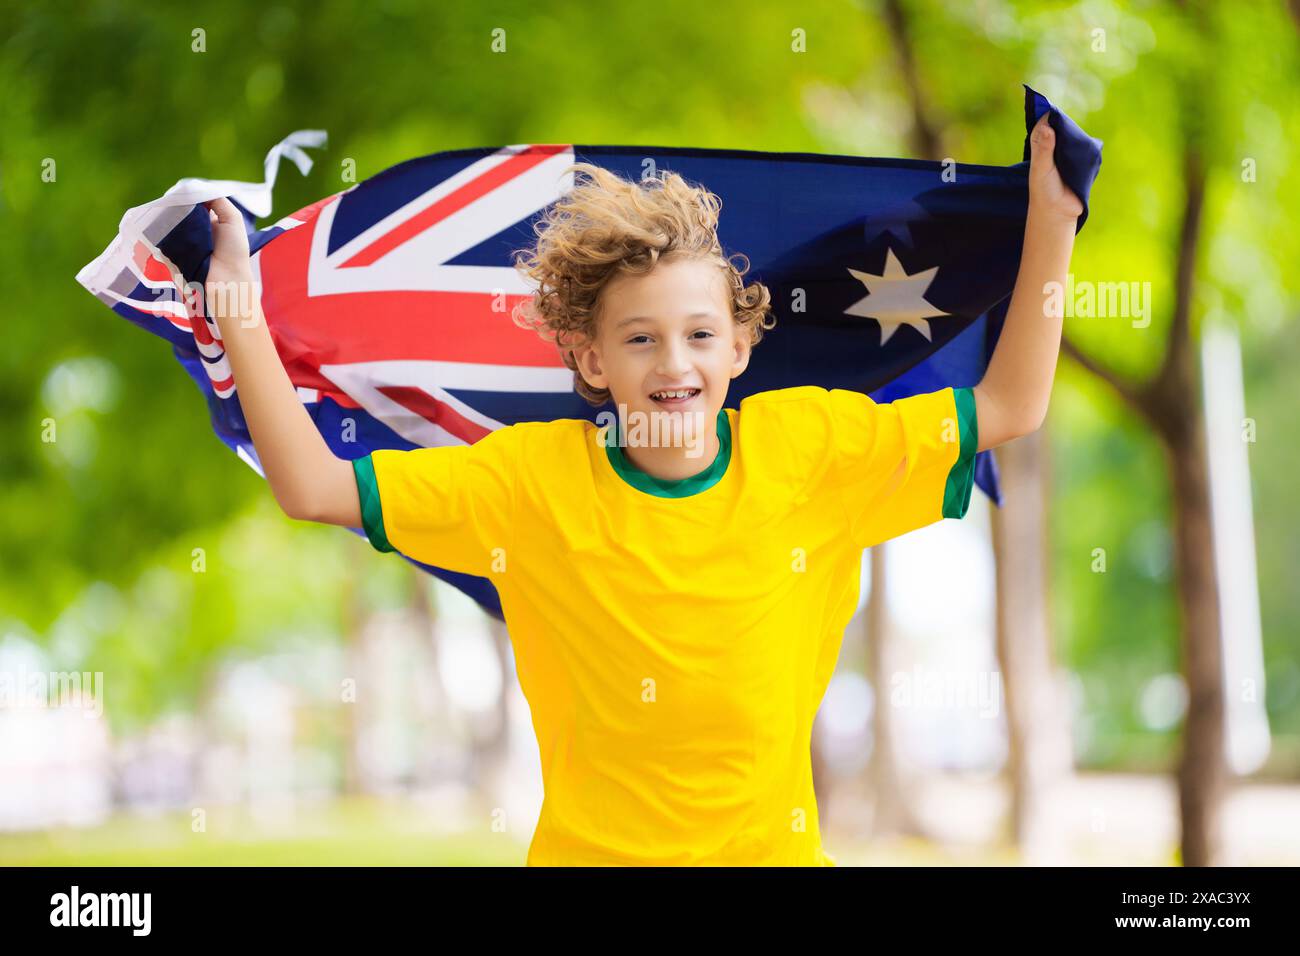 Australia team fans with flag. Australian supporter child. Kid cheering for Aussie football or cricket team victory. Happy little boy national flag Stock Photo